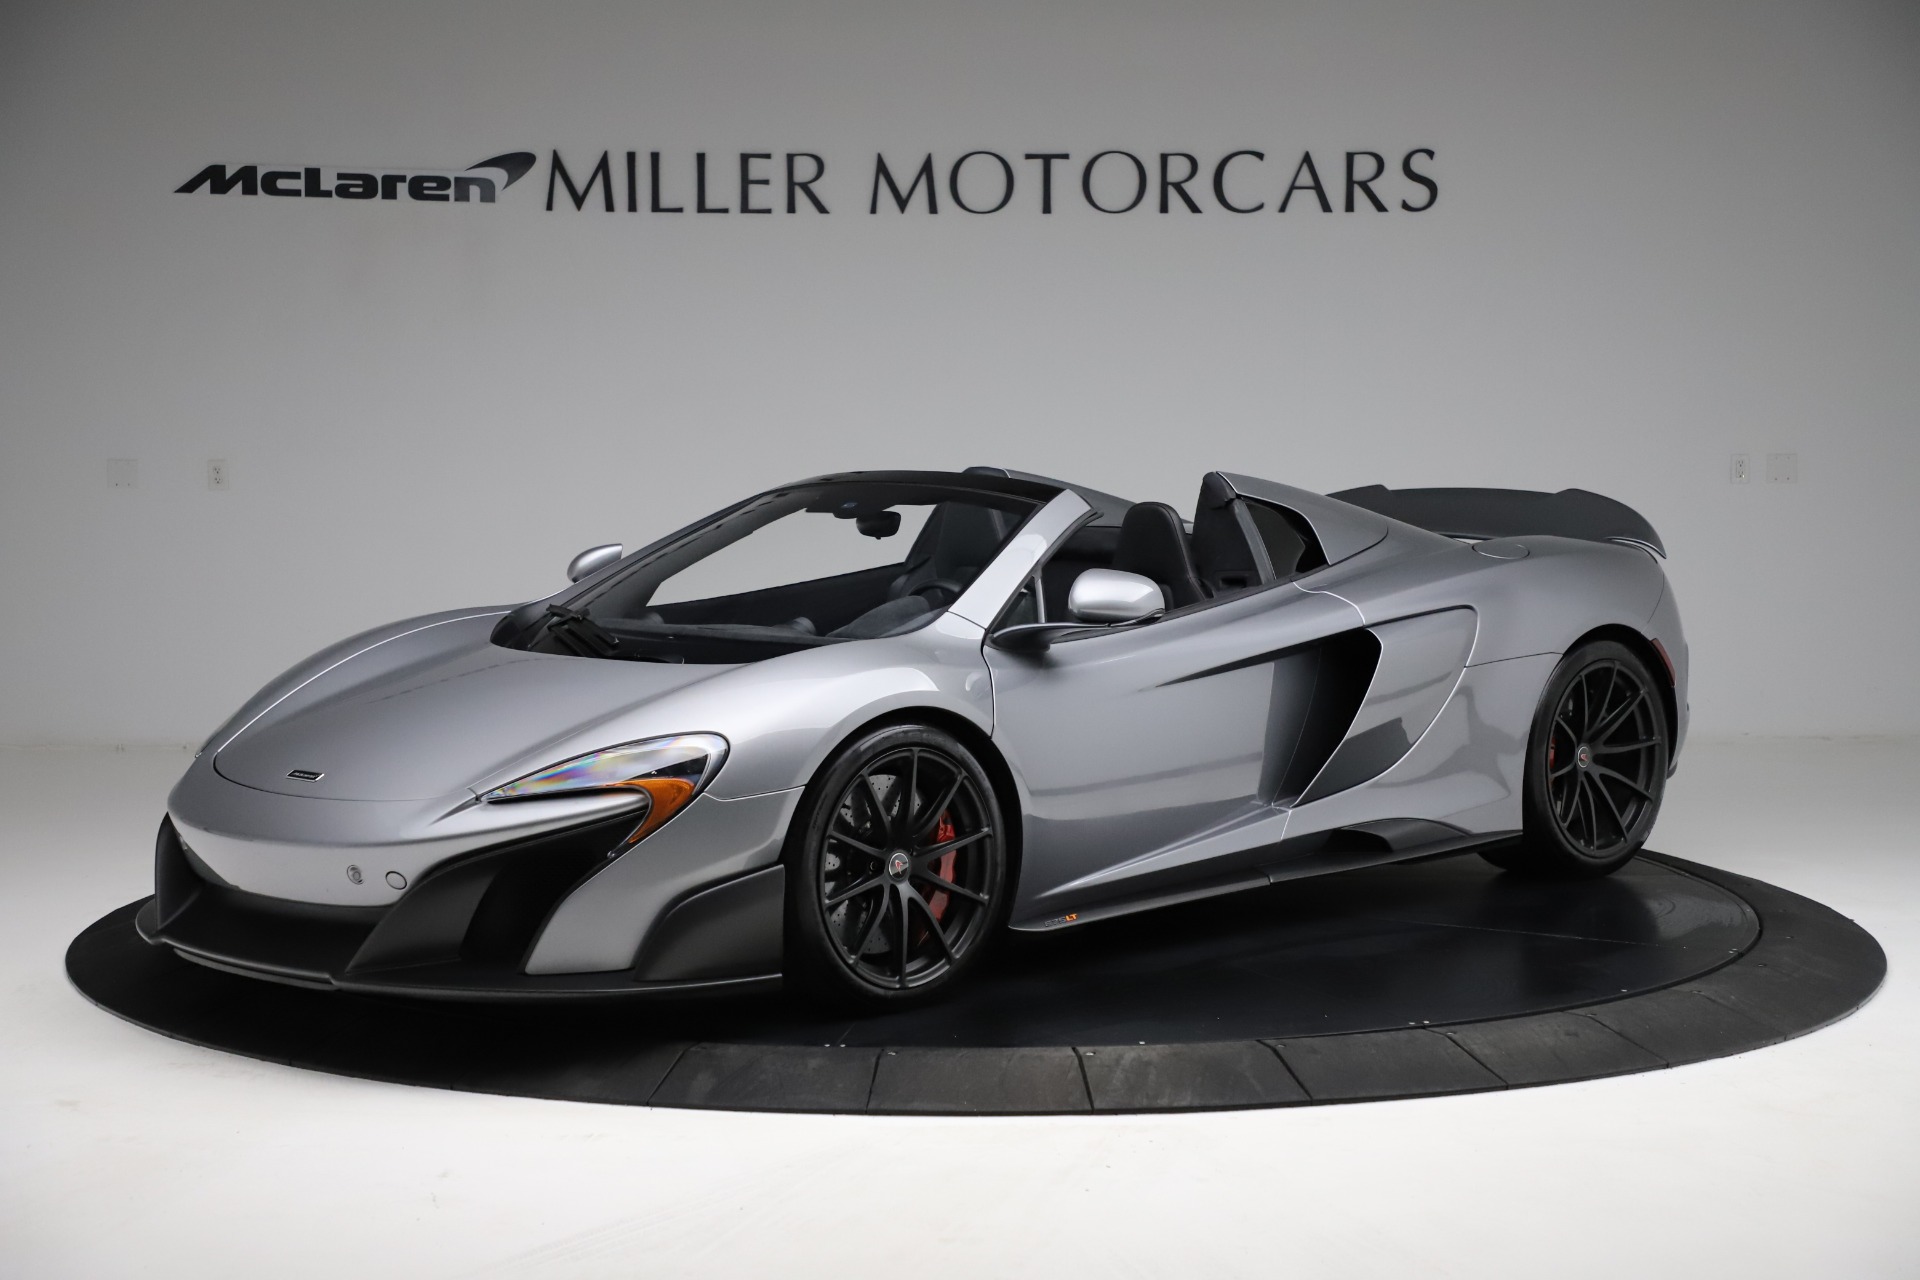 Used 2016 McLaren 675LT Spider for sale Sold at Bentley Greenwich in Greenwich CT 06830 1